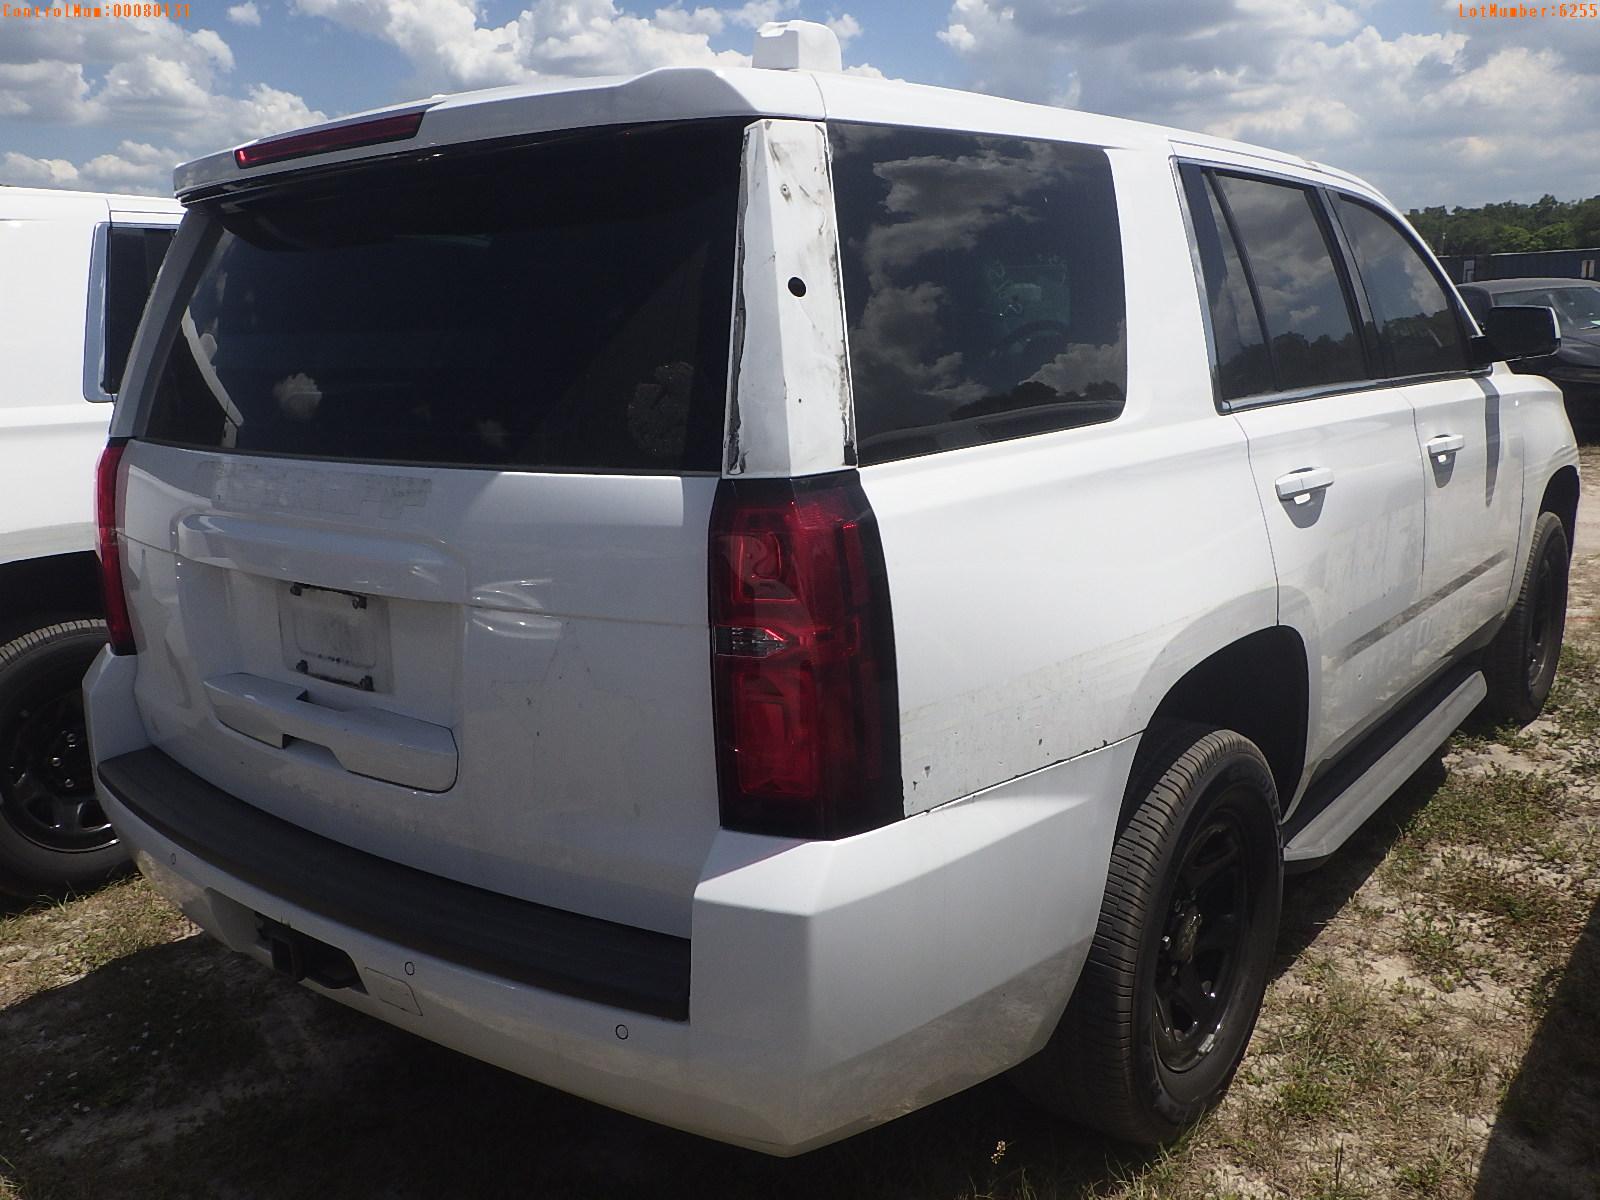 5-06255 (Cars-SUV 4D)  Seller: Gov-Pinellas County Sheriffs Ofc 2015 CHEV TAHOE